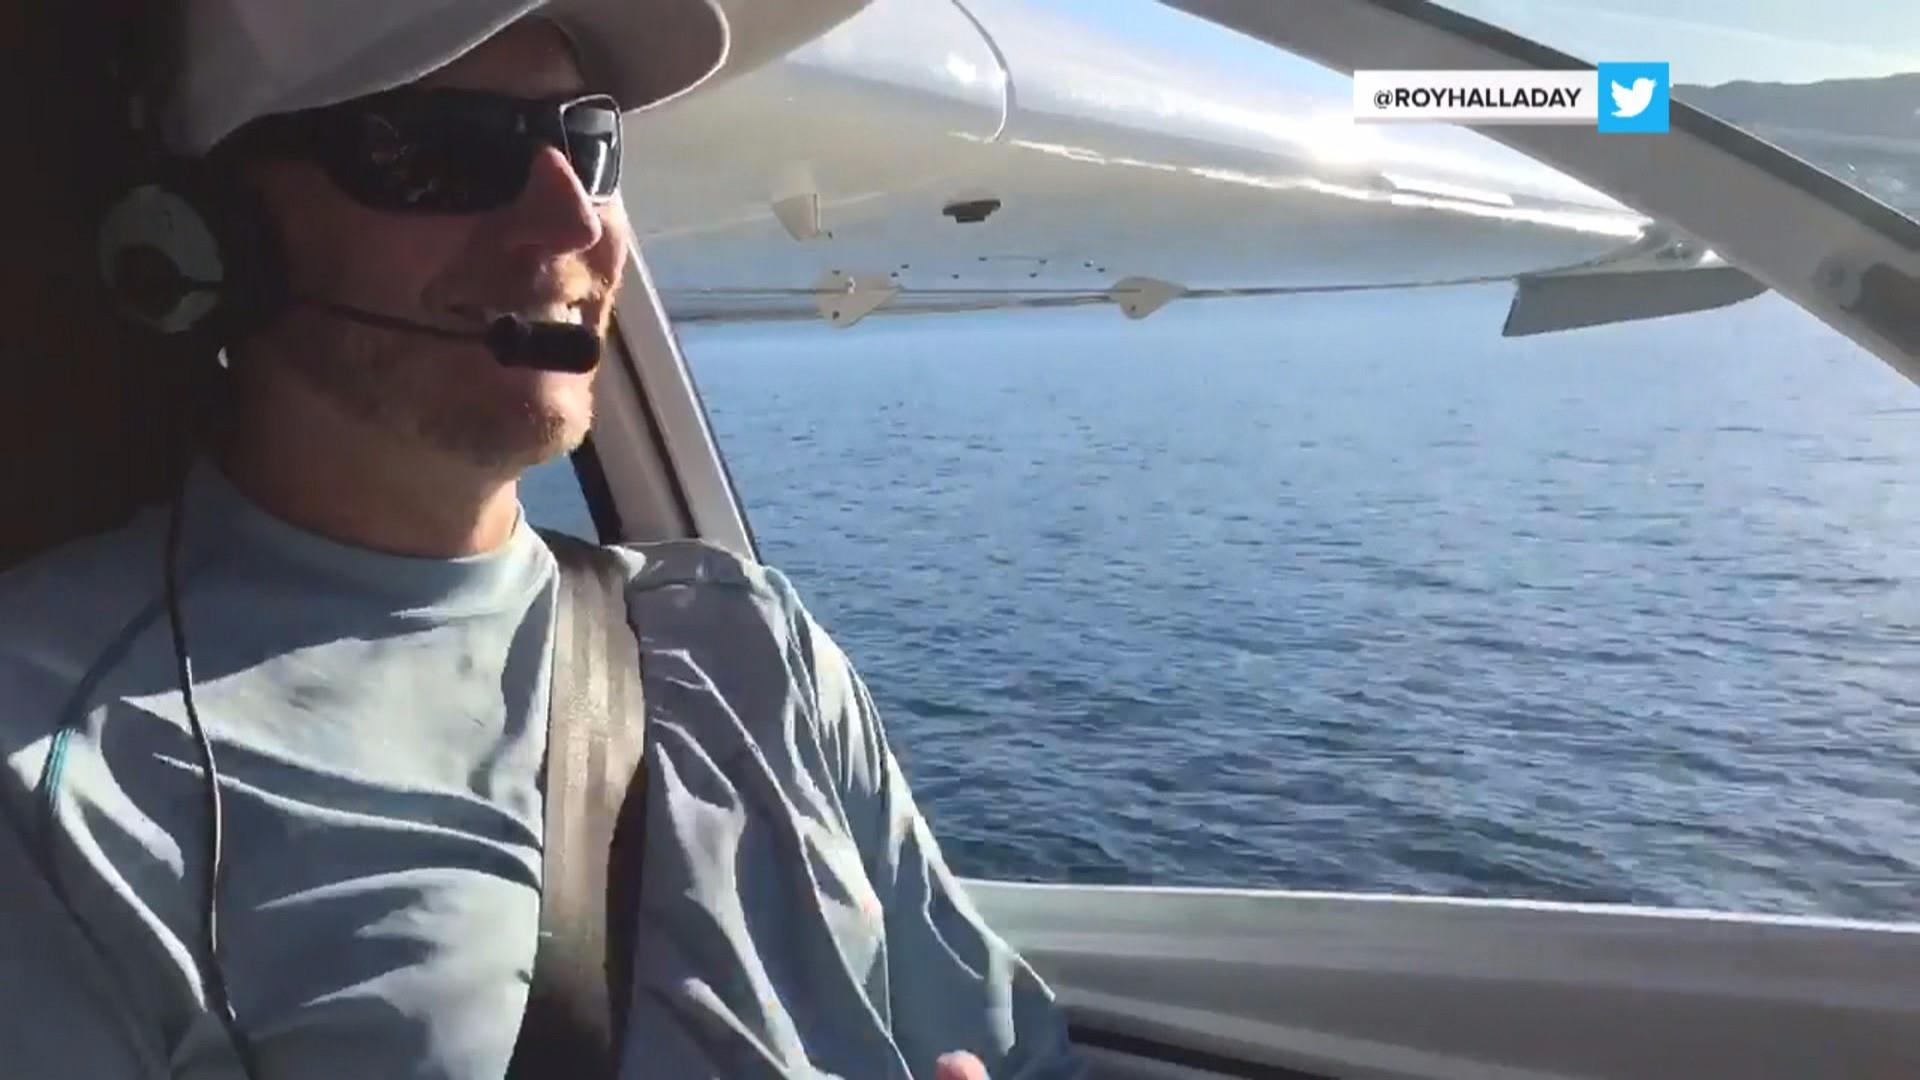 Footage of Roy Halliday flying just before crash emerges